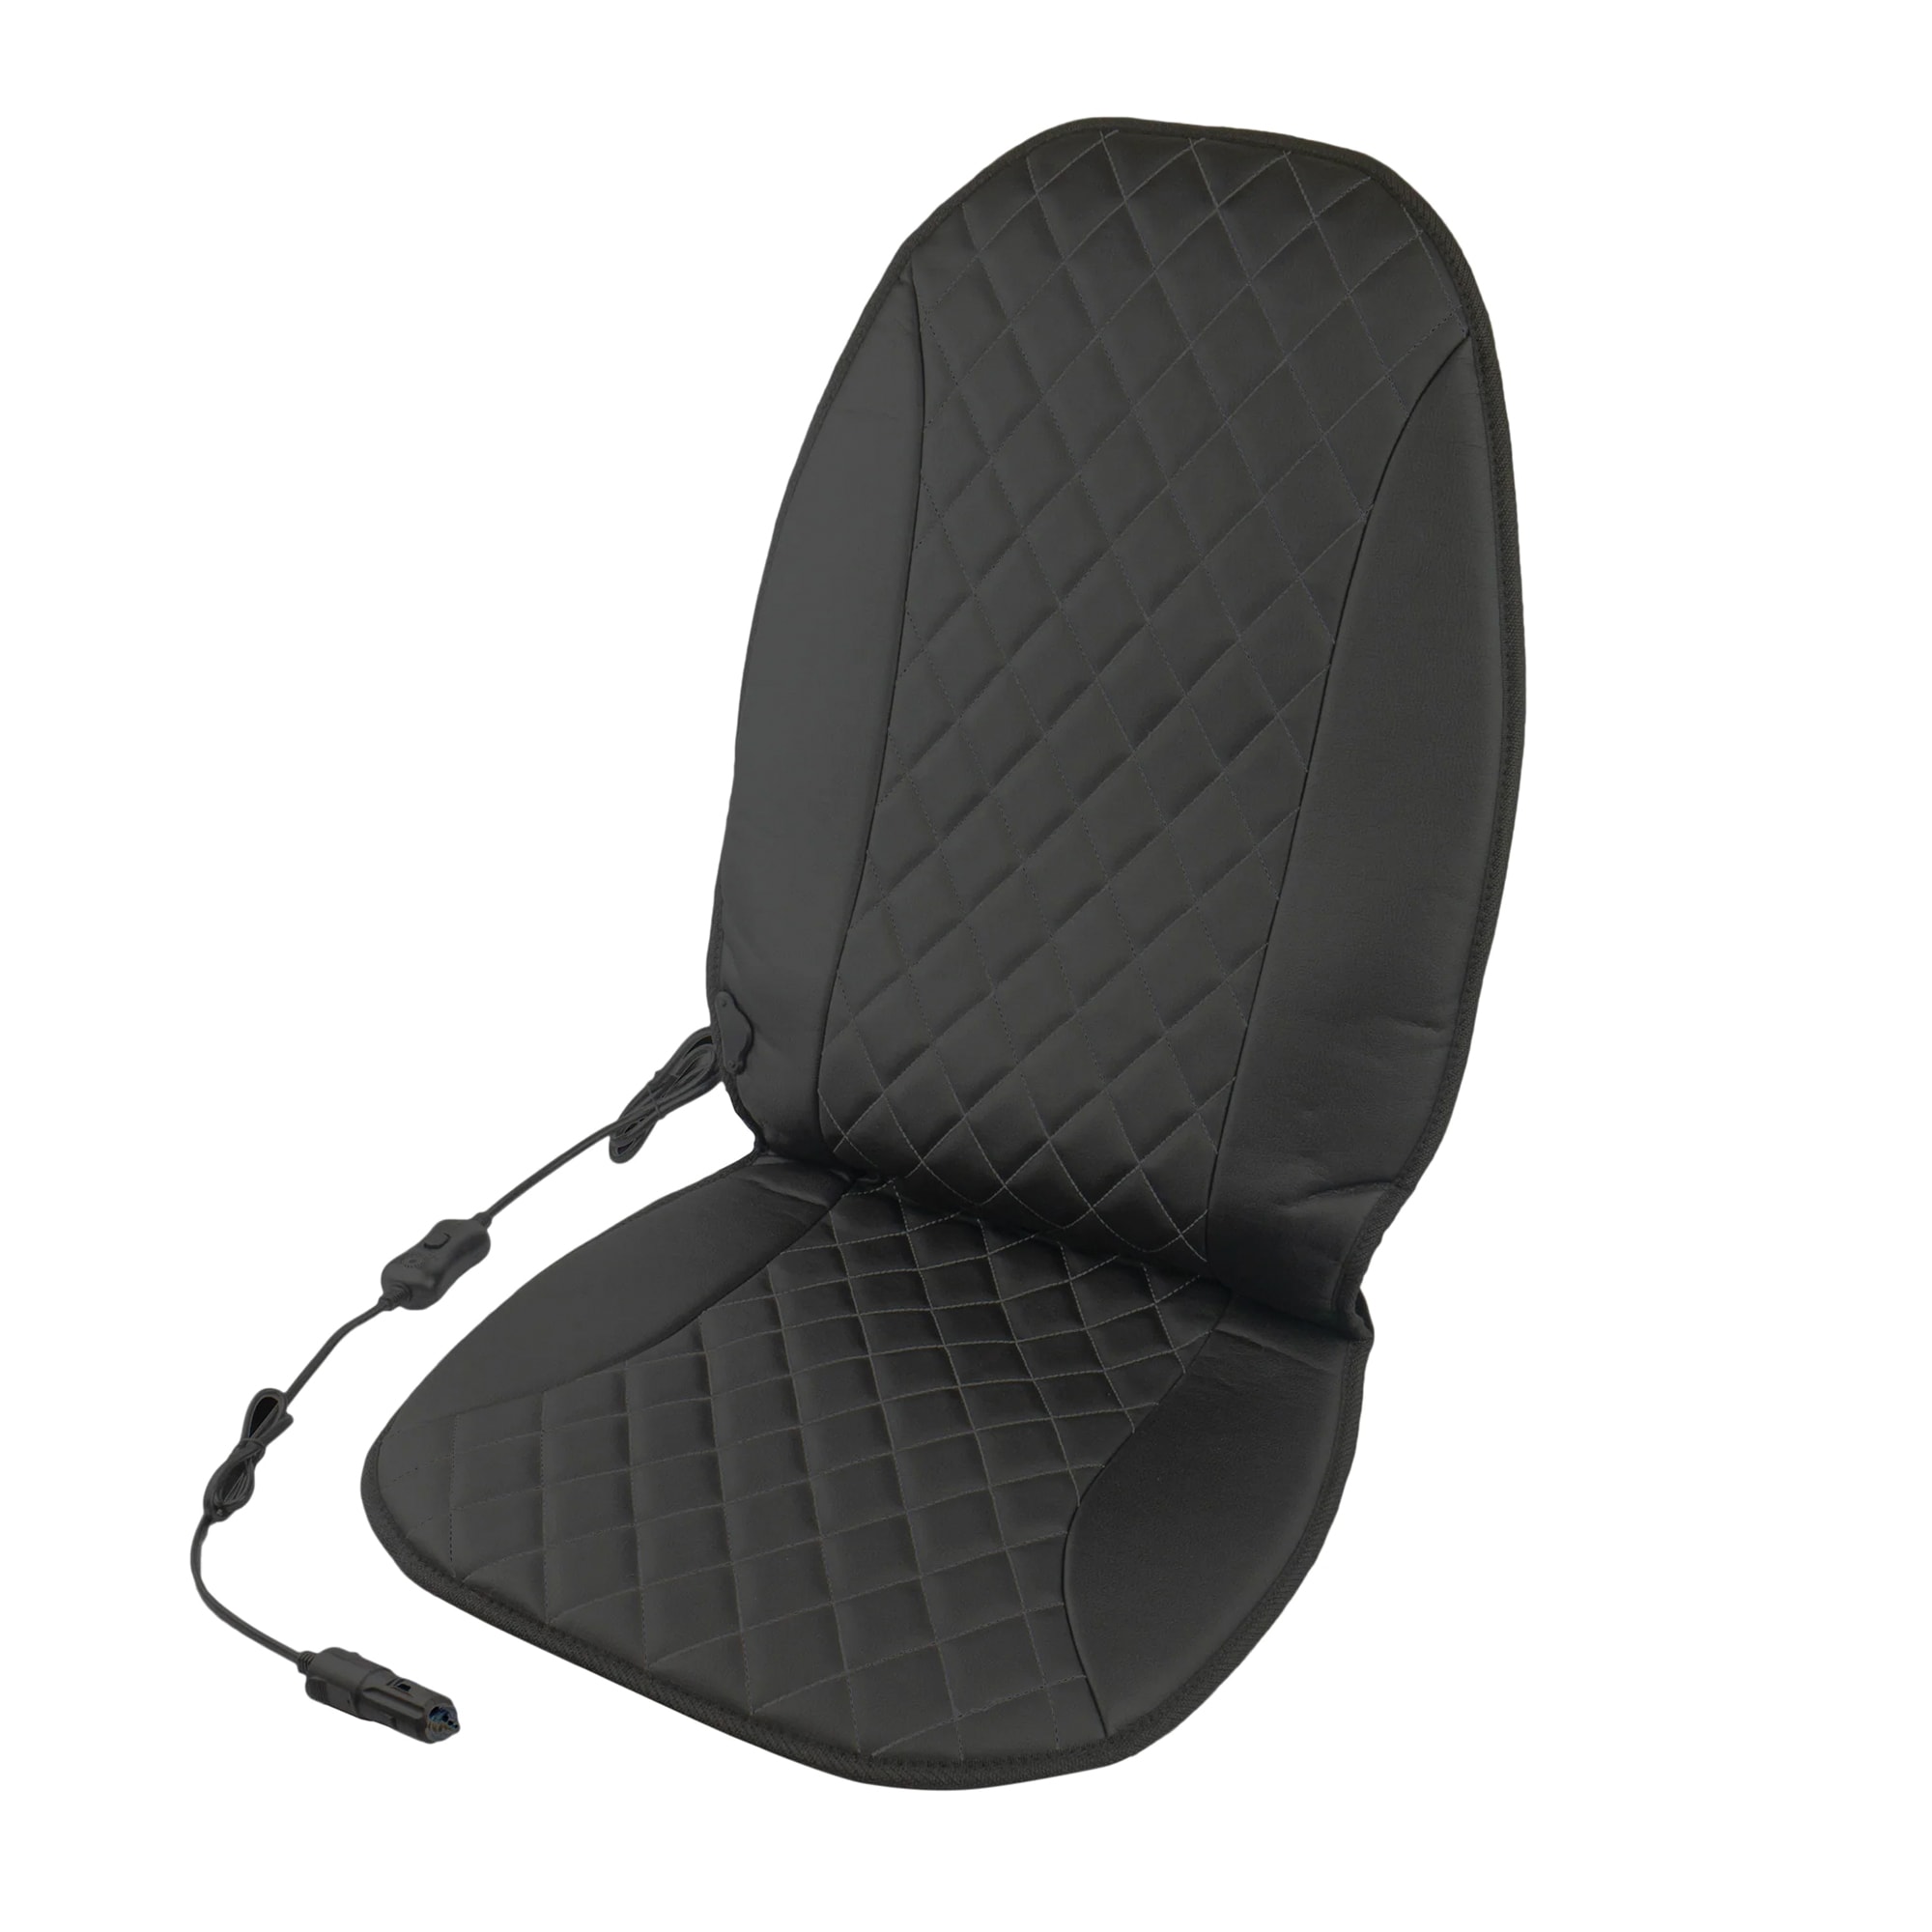 New Winter Heated Seat Cushion 12V Graphene Heated Seat Cover For Office  Chair